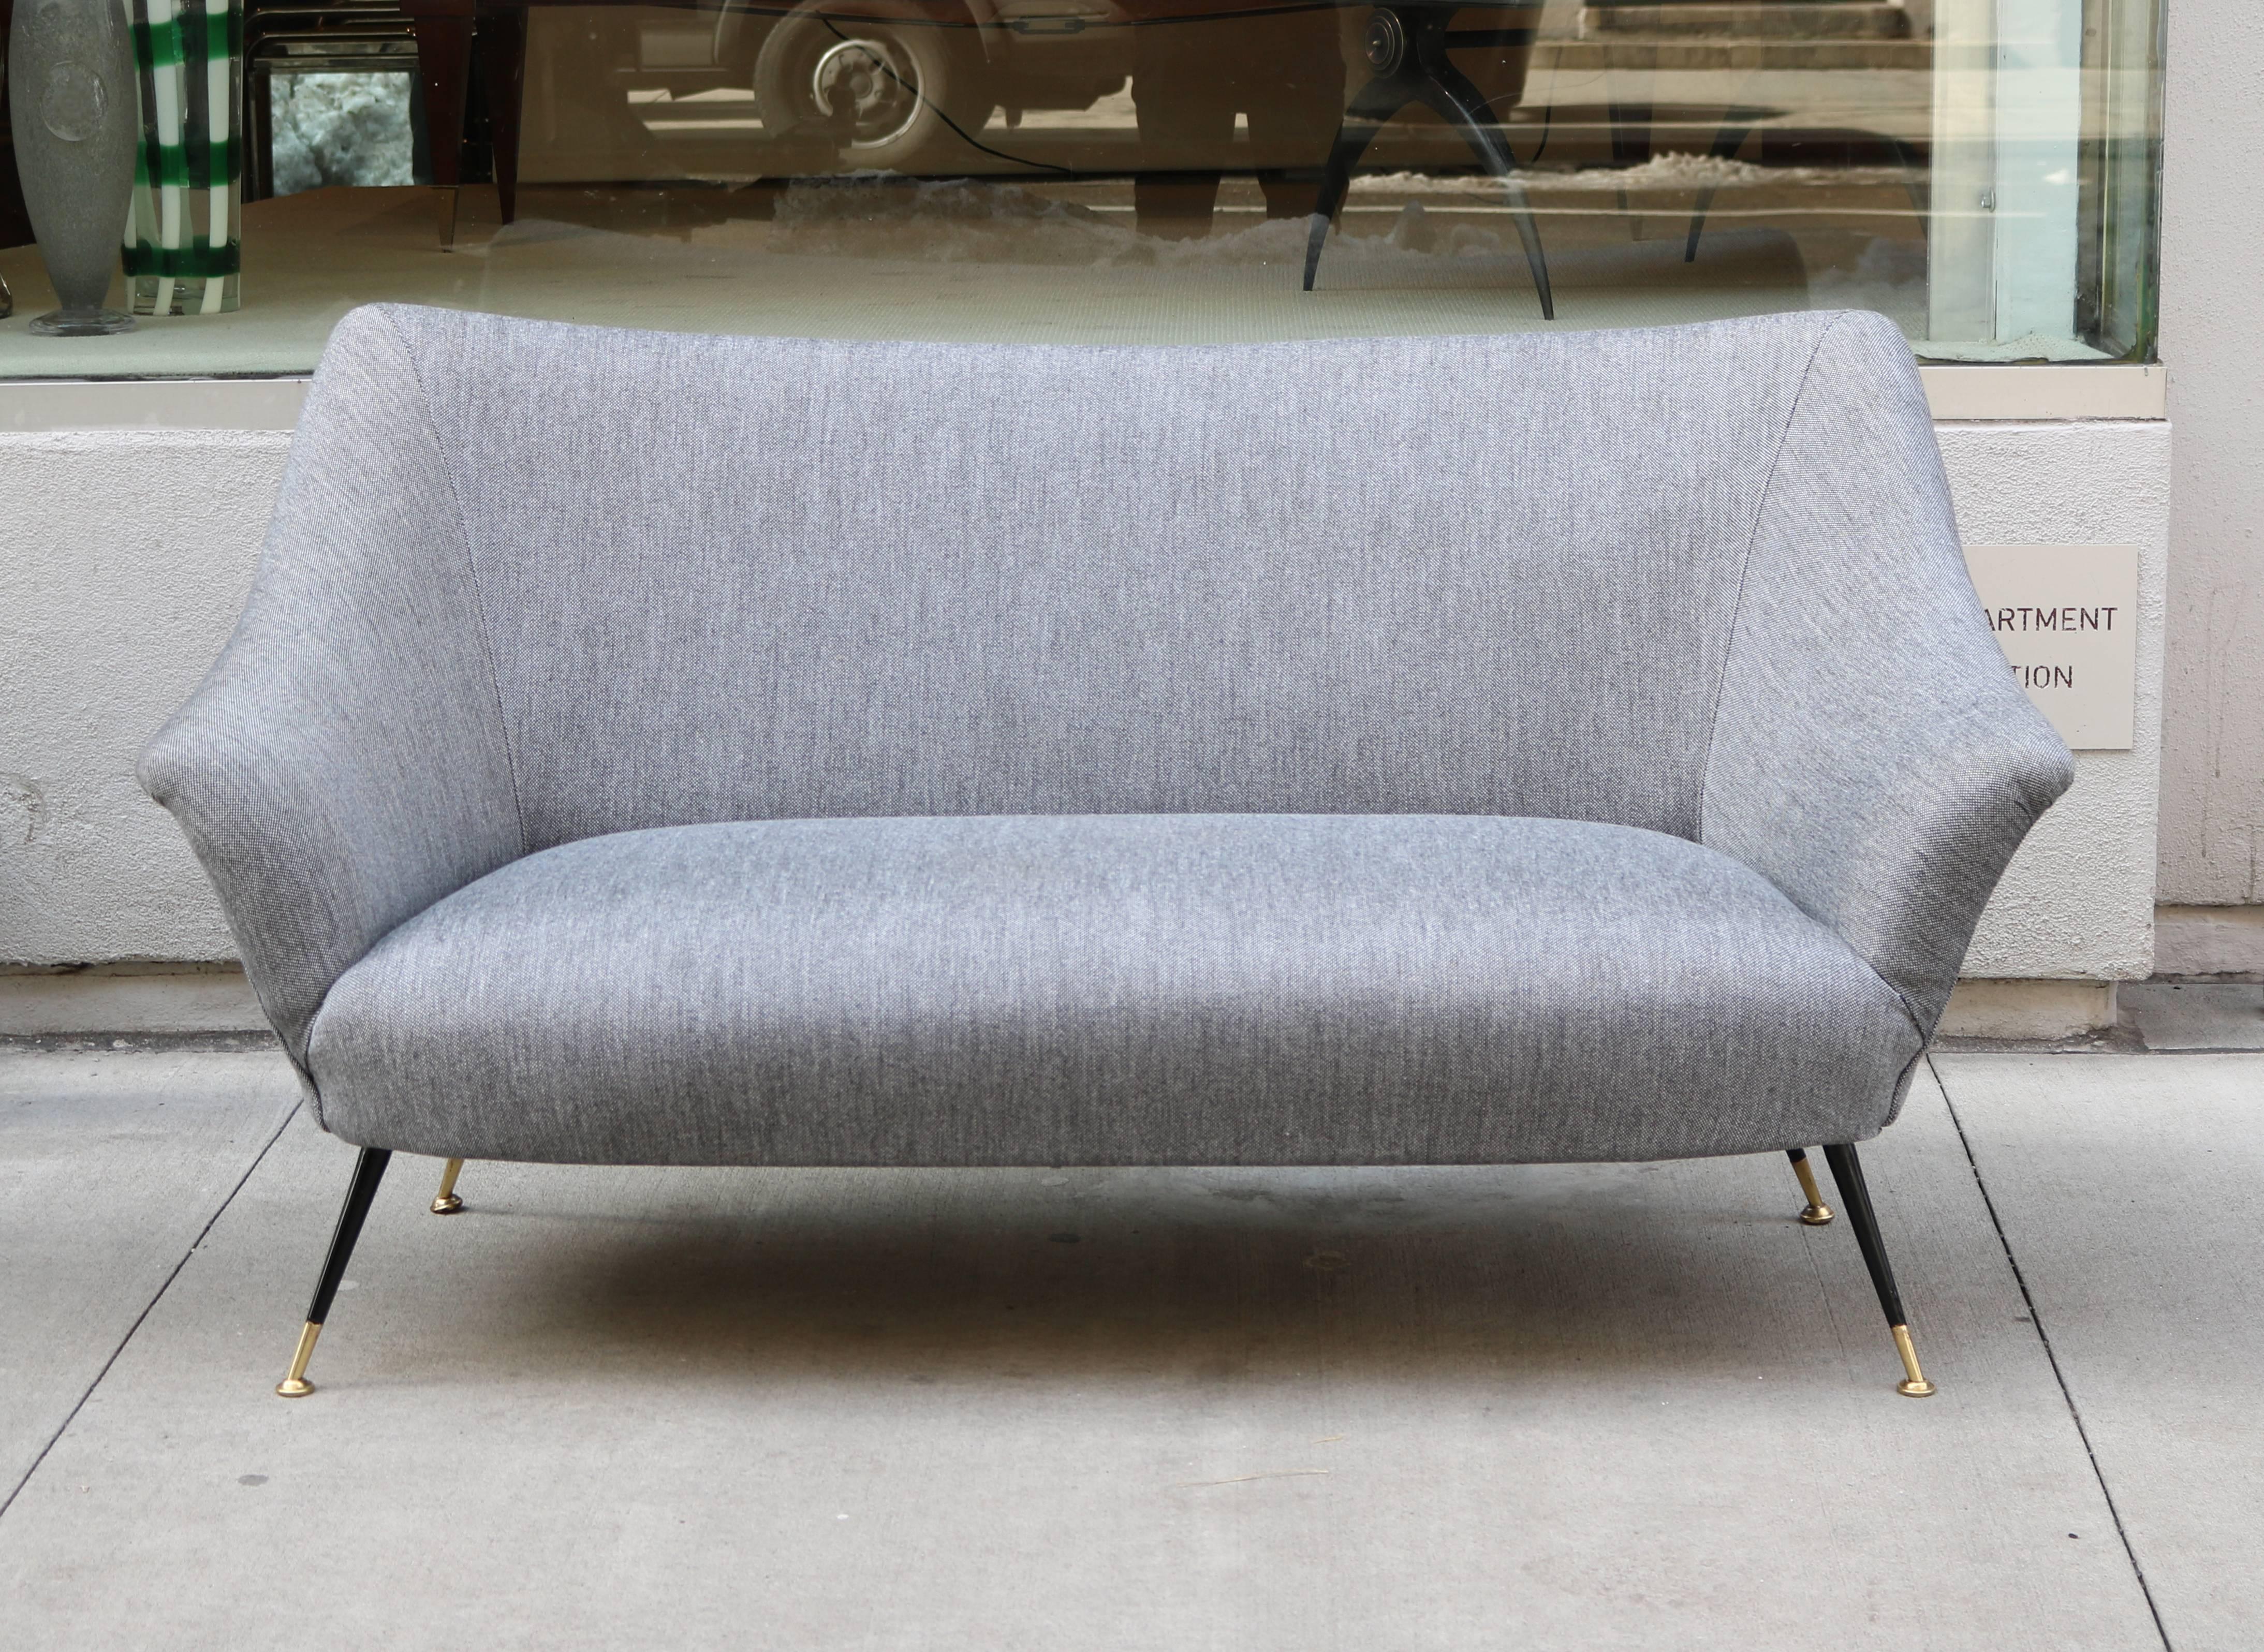 An Italian Modernist settee.
Upholstered with black enameled metal legs 
and patinated brass details.